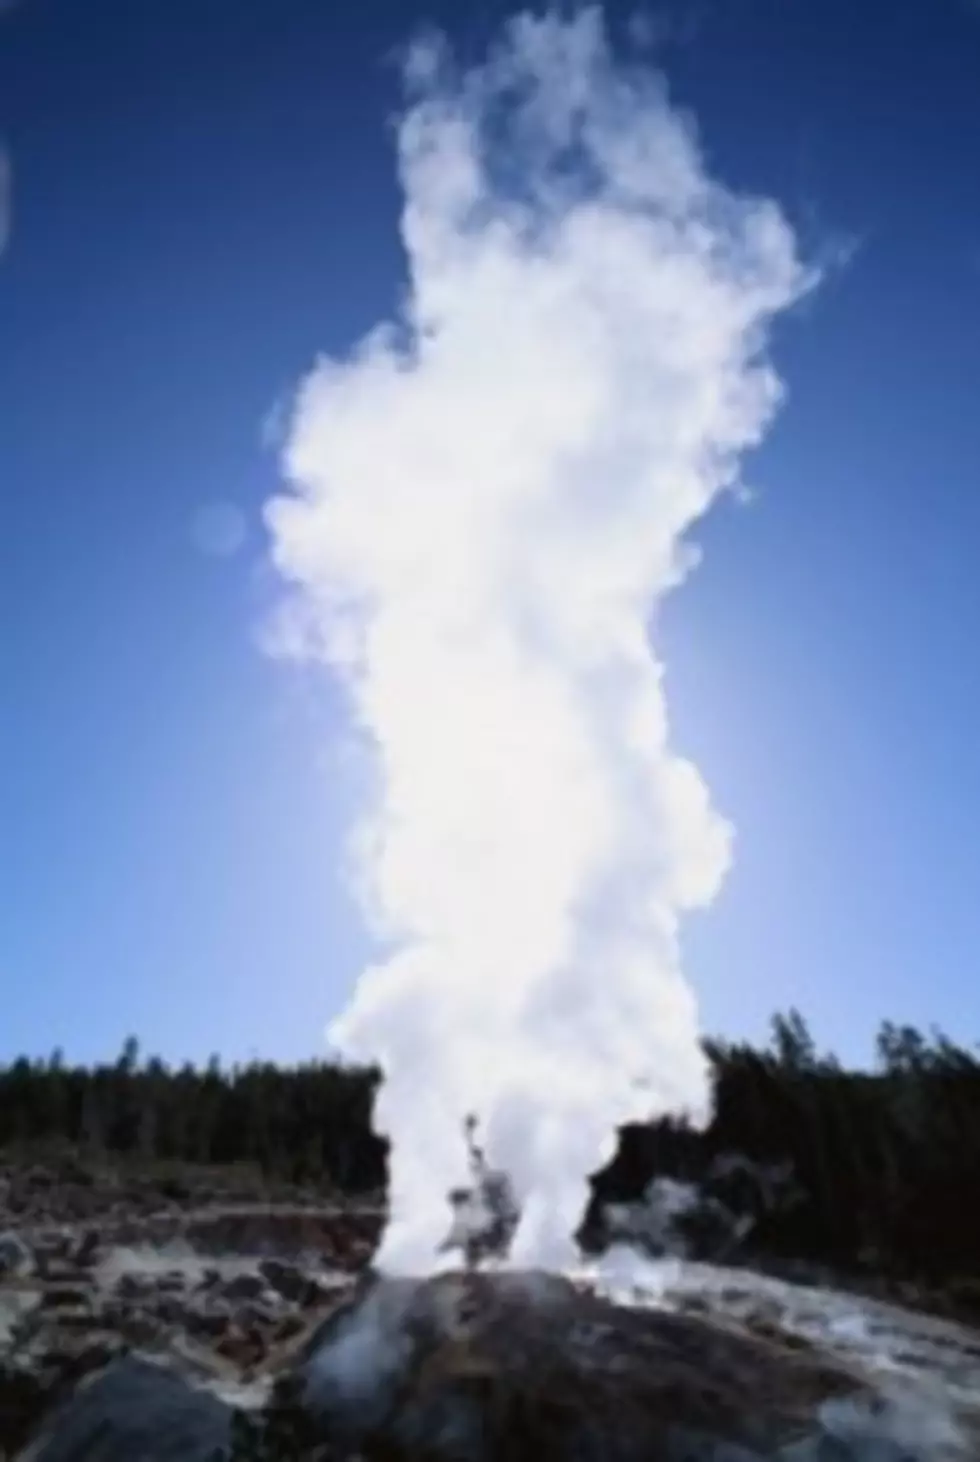 Study Offers Suggestions on Preserving Old Faithful